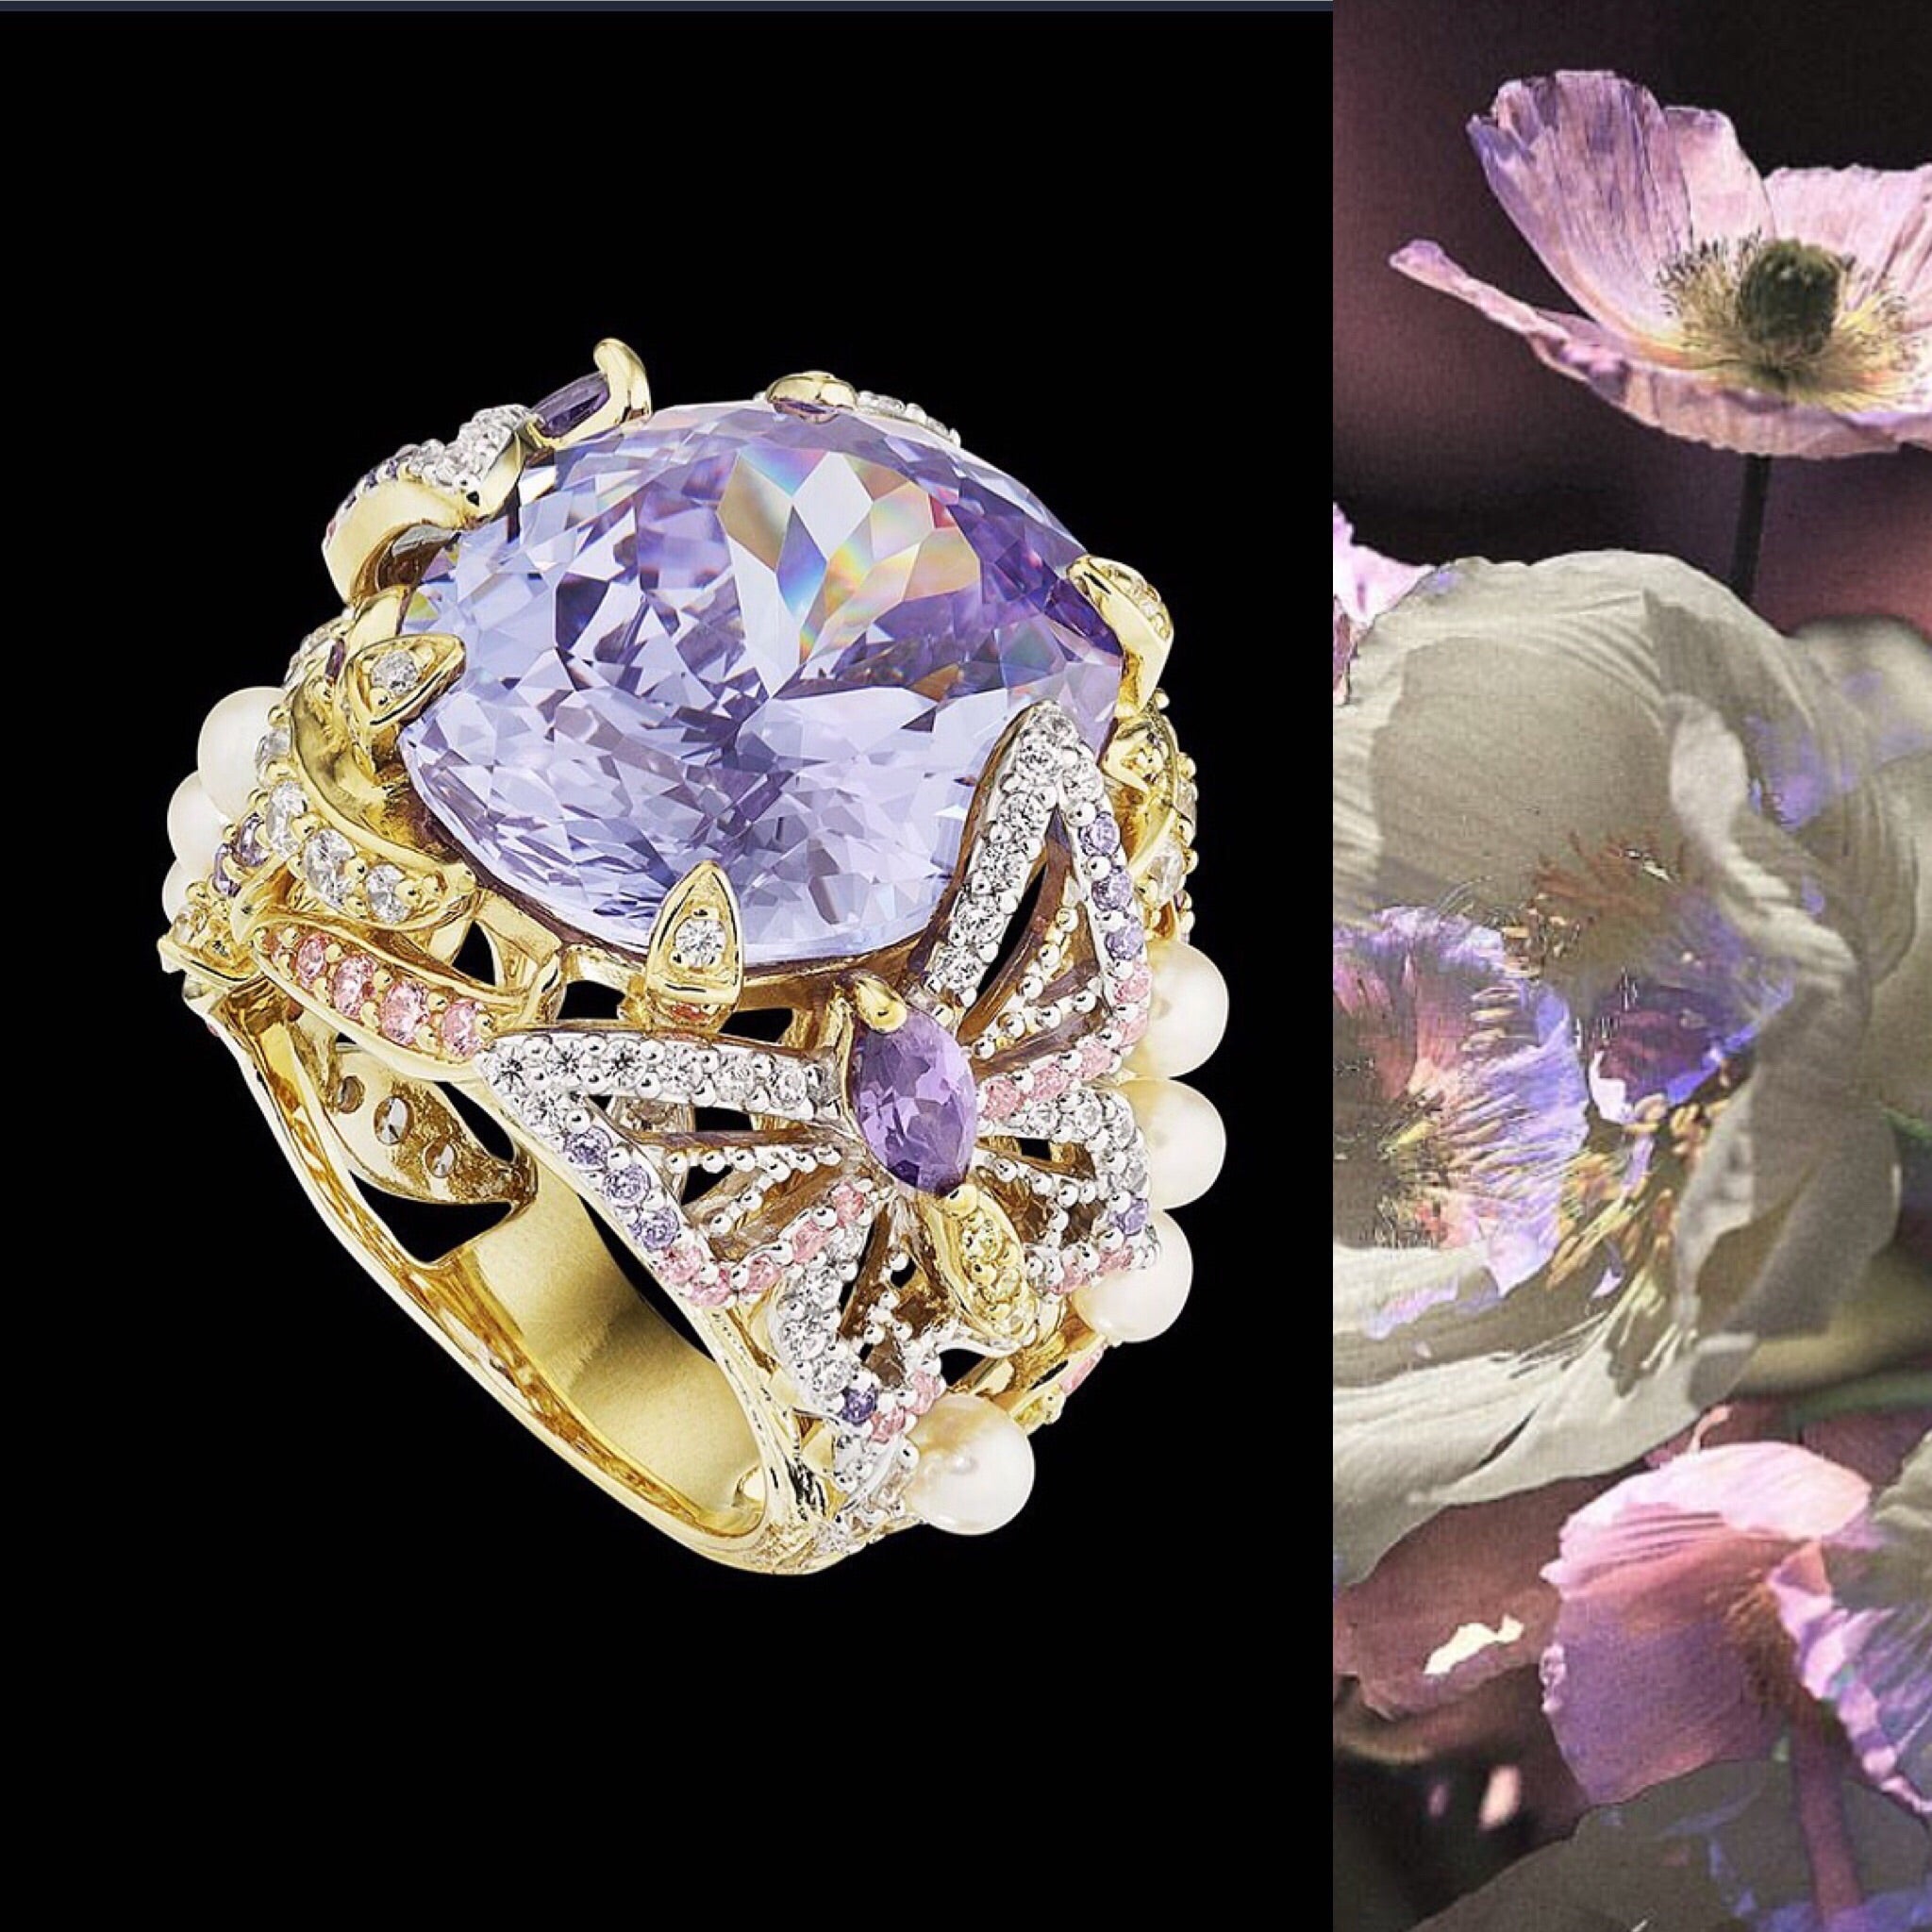 Lilac Swallowtail Ring, Ring, Anabela Chan Joaillerie - Fine jewelry with laboratory grown and created gemstones hand-crafted in the United Kingdom. Anabela Chan Joaillerie is the first fine jewellery brand in the world to champion laboratory-grown and created gemstones with high jewellery design, artisanal craftsmanship and a focus on ethical and sustainable innovations.